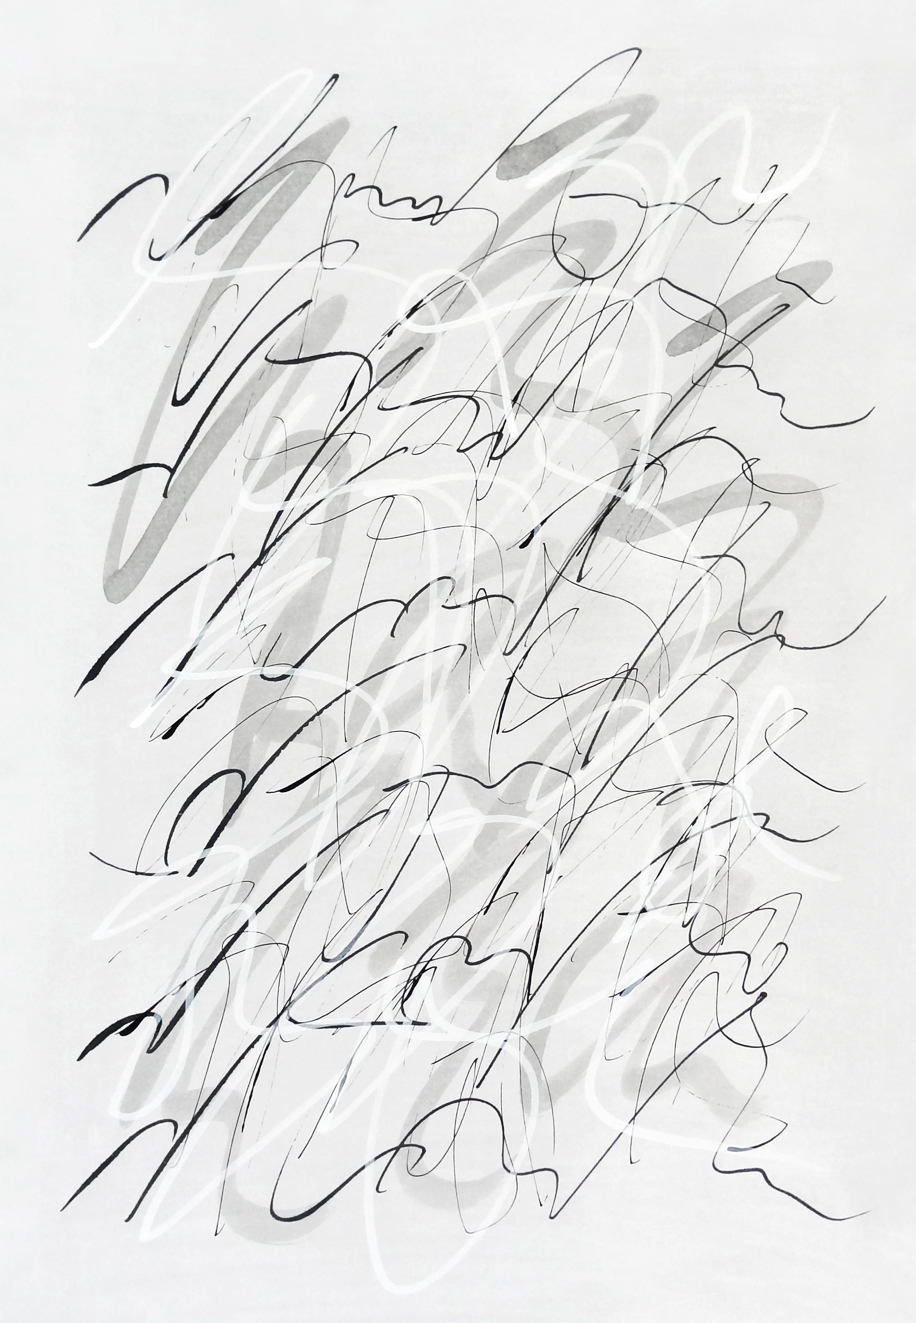  Untitled, 2019 calligraphy ink on paper 42,0 x 29,7 cm (28-19) 